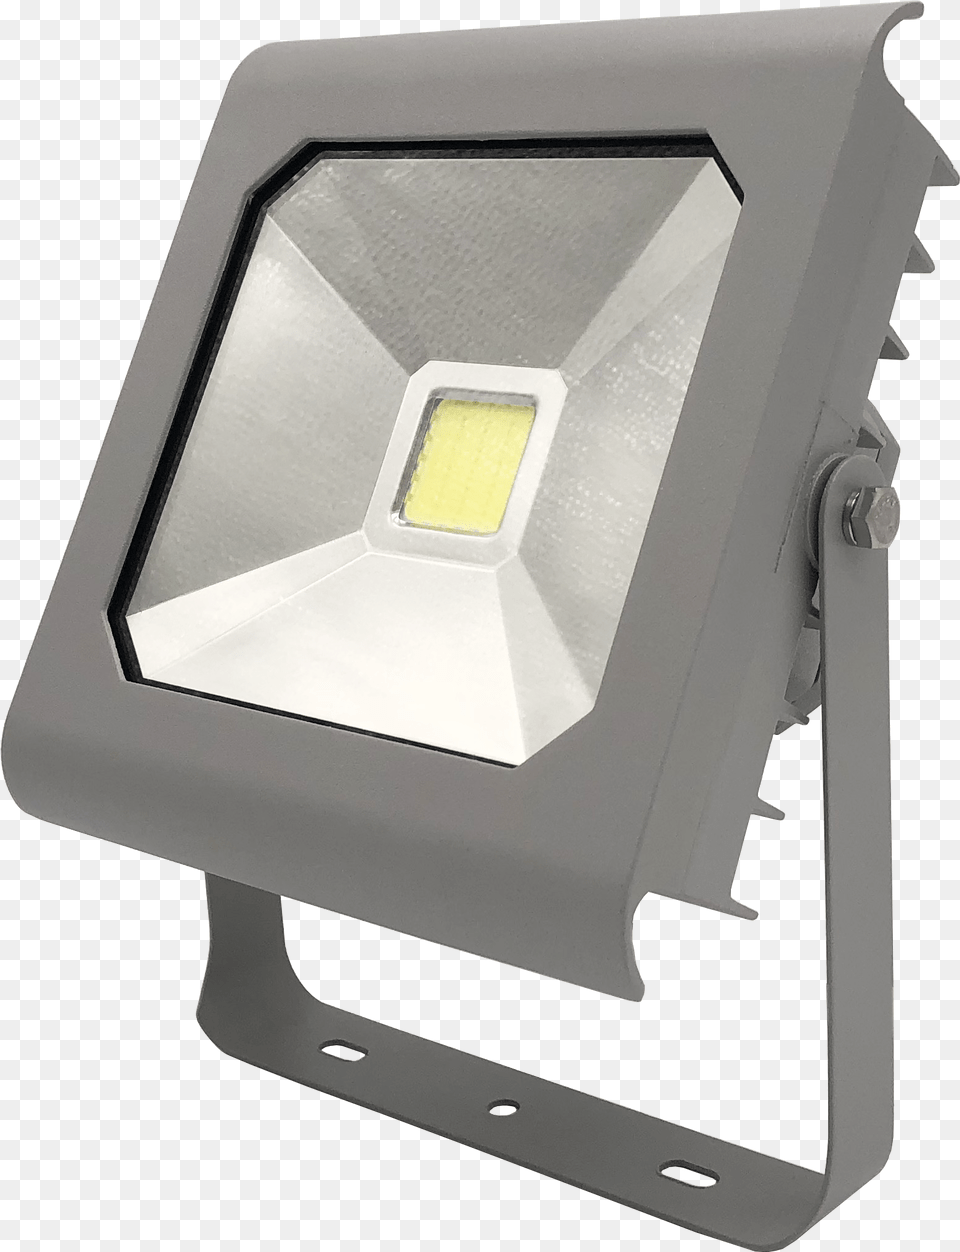 Download Ip65 Outdoor Aurora Cob Serial Serial Light Hd, Electronics, Led, Lighting, Mailbox Png Image